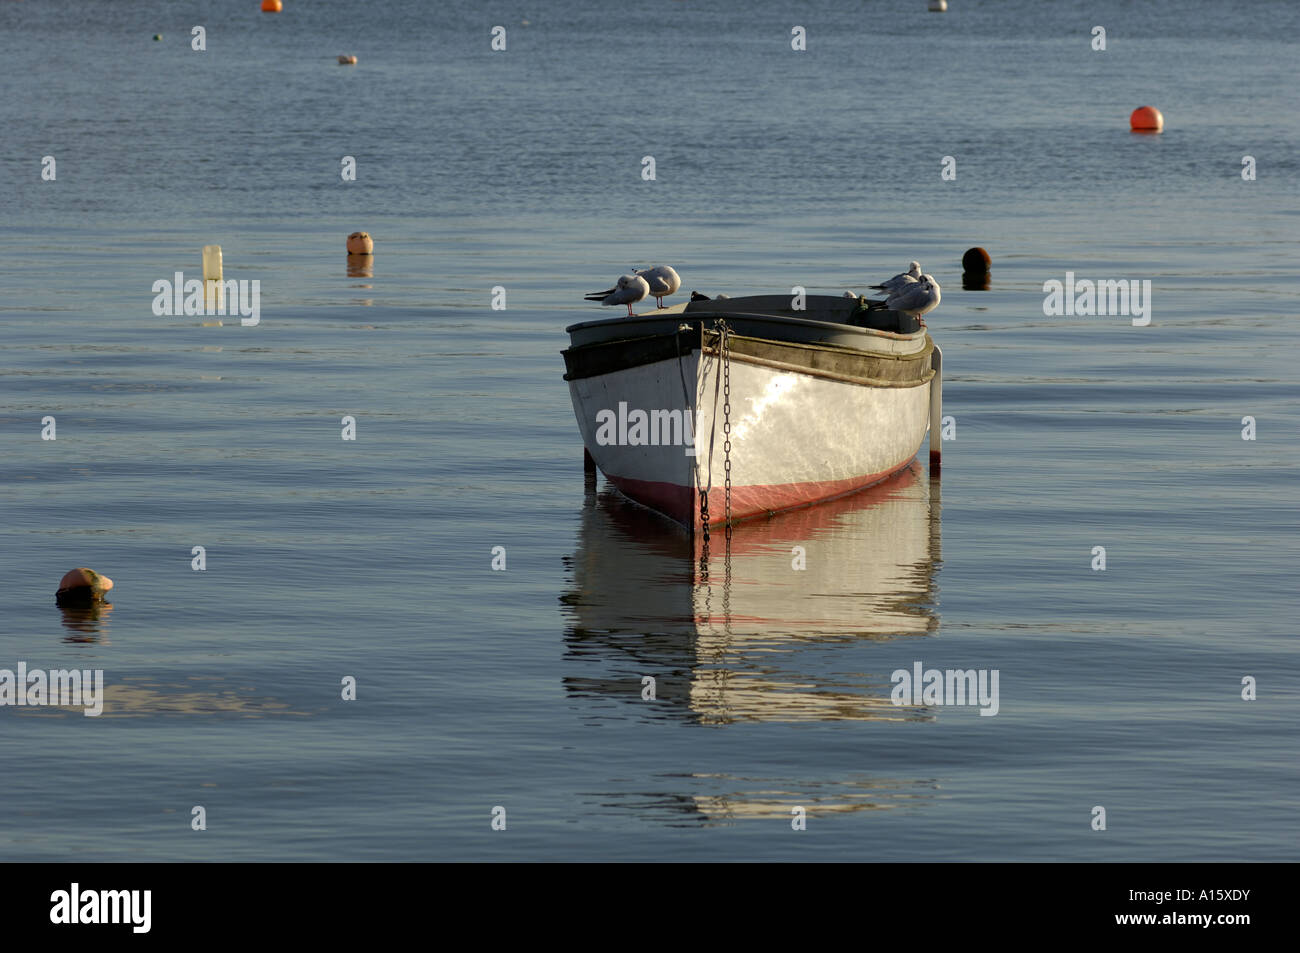 Boats of all shapes and descriptions in the waters around Plymouth, United Kingdom. Stock Photo